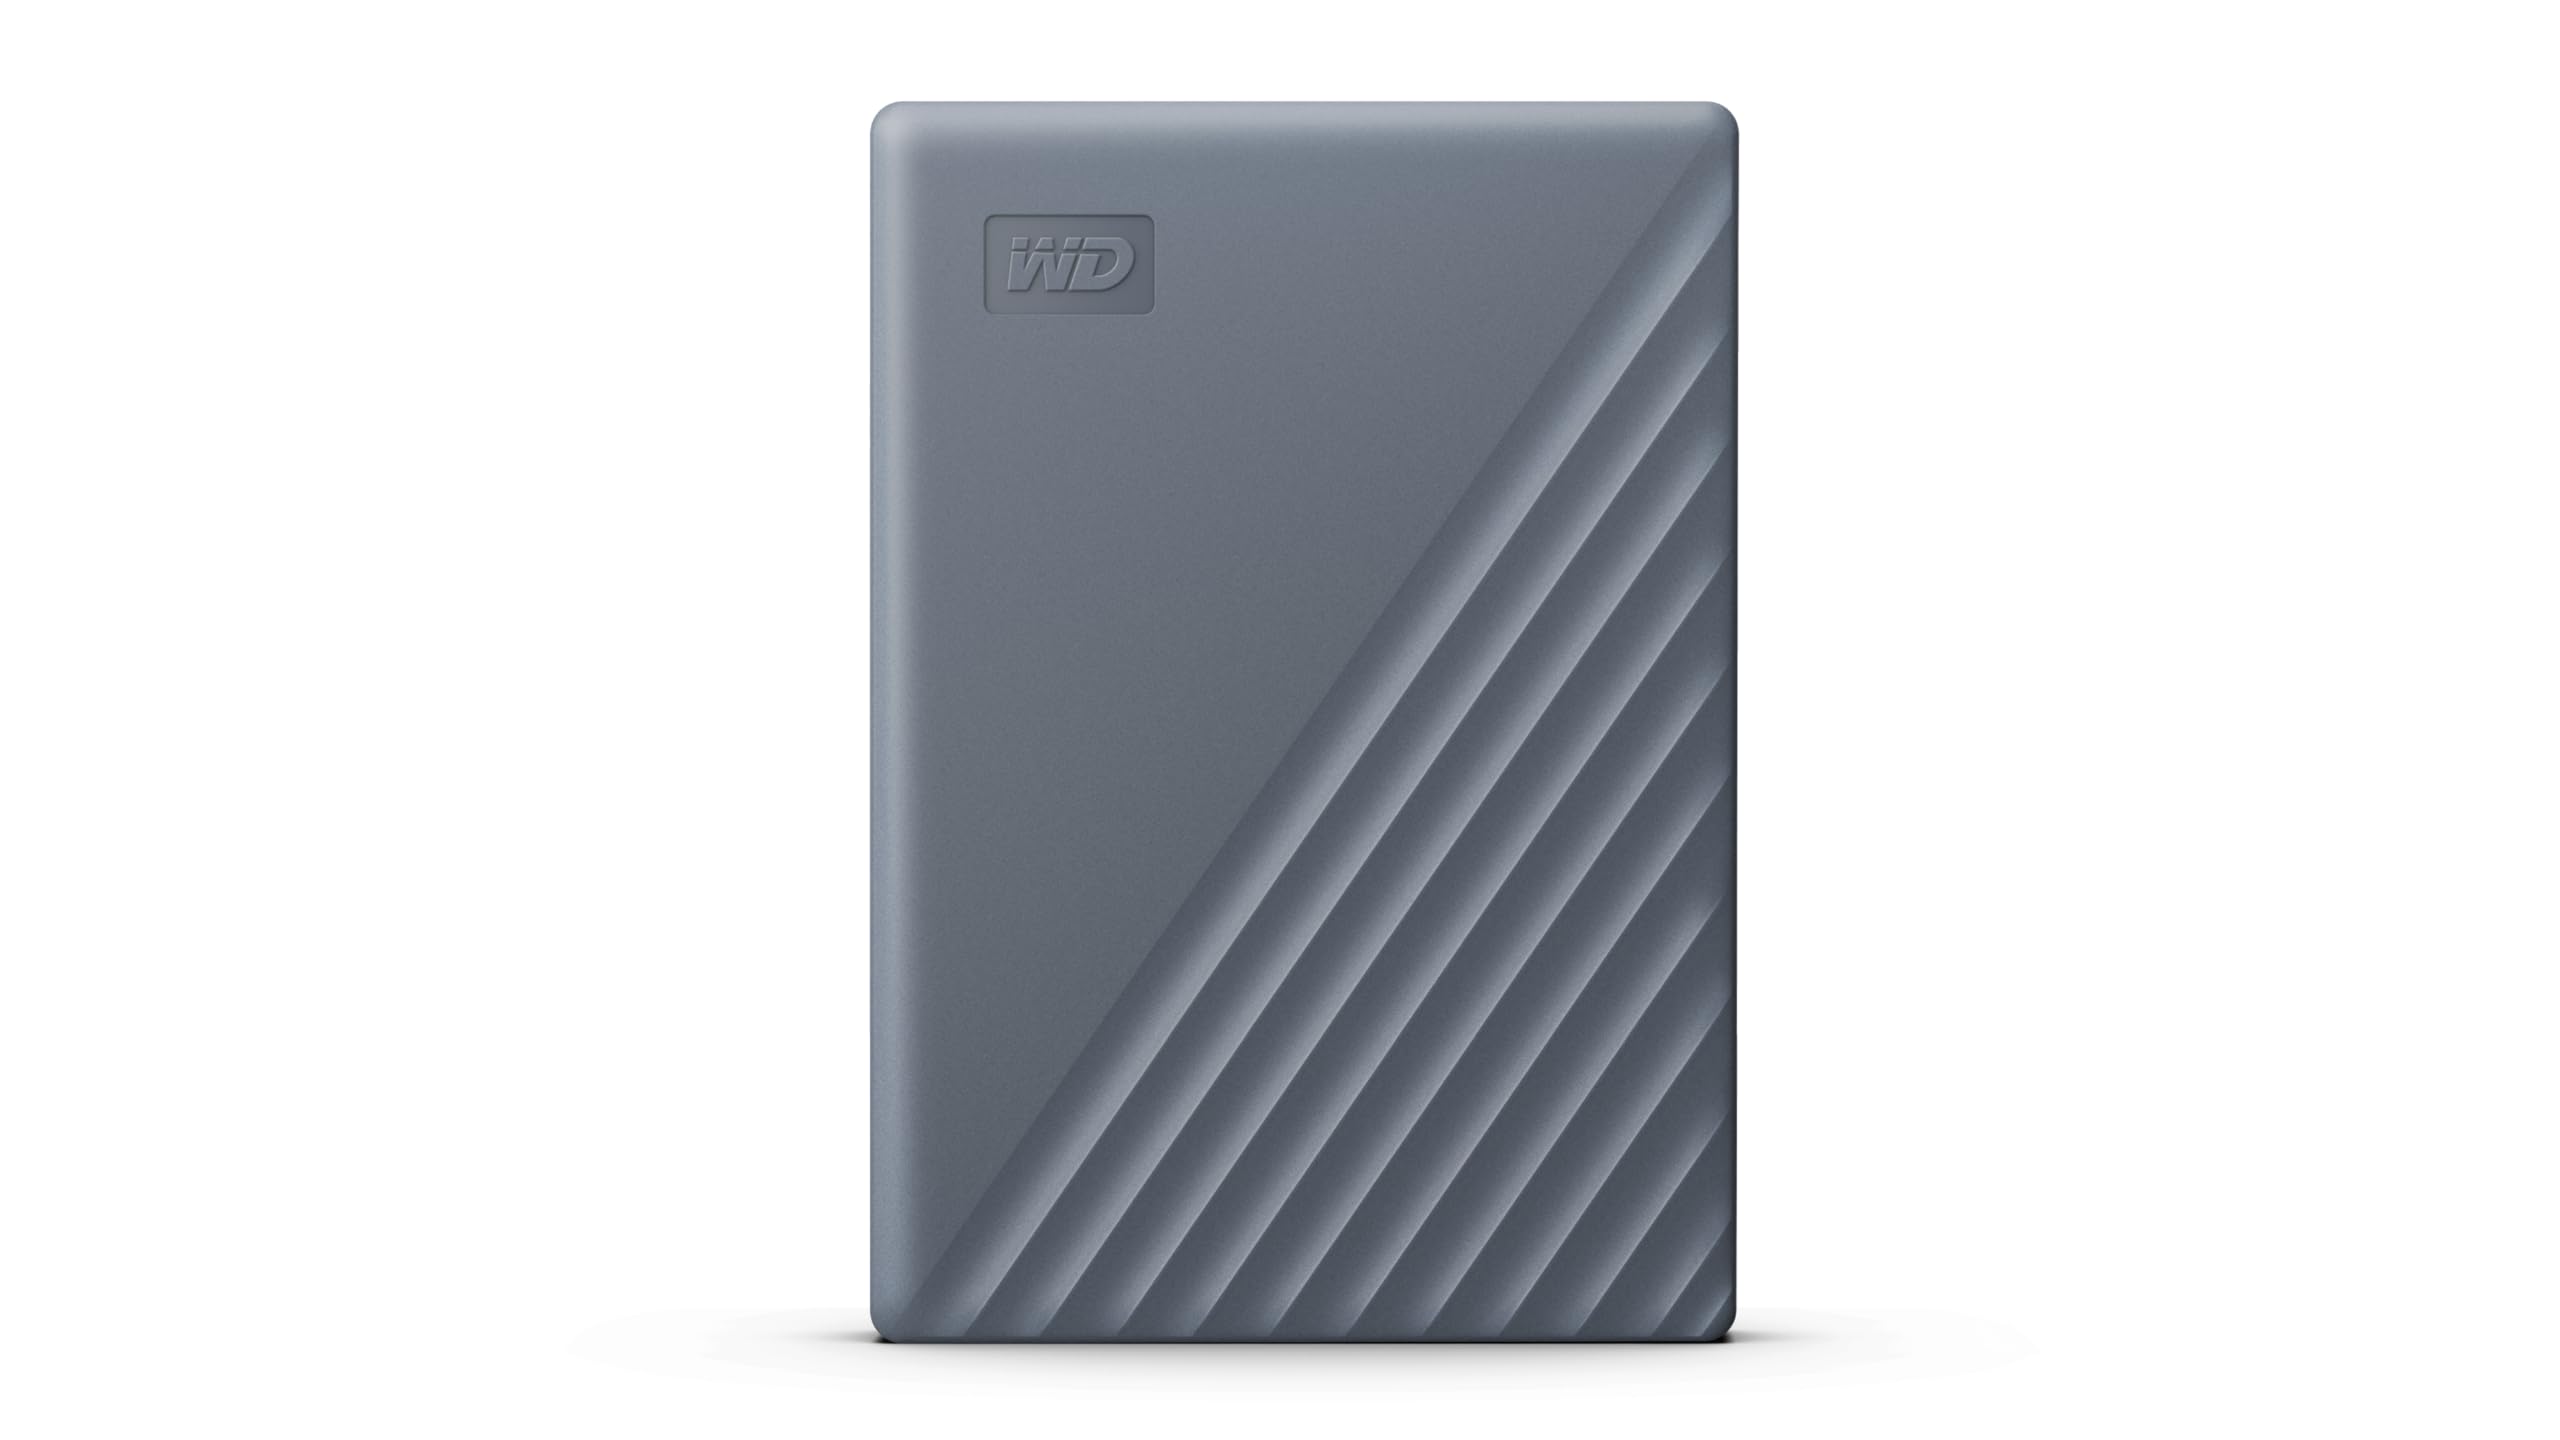 Western Digital 2TB Portable Hard Drive, USB-C&USB-A Devices, Windows PC, Mac, Chromebook, Gaming Consoles,Mobile Devices, Includes Backup Software&Password Protection - WDBRMD0020BGY-WESN